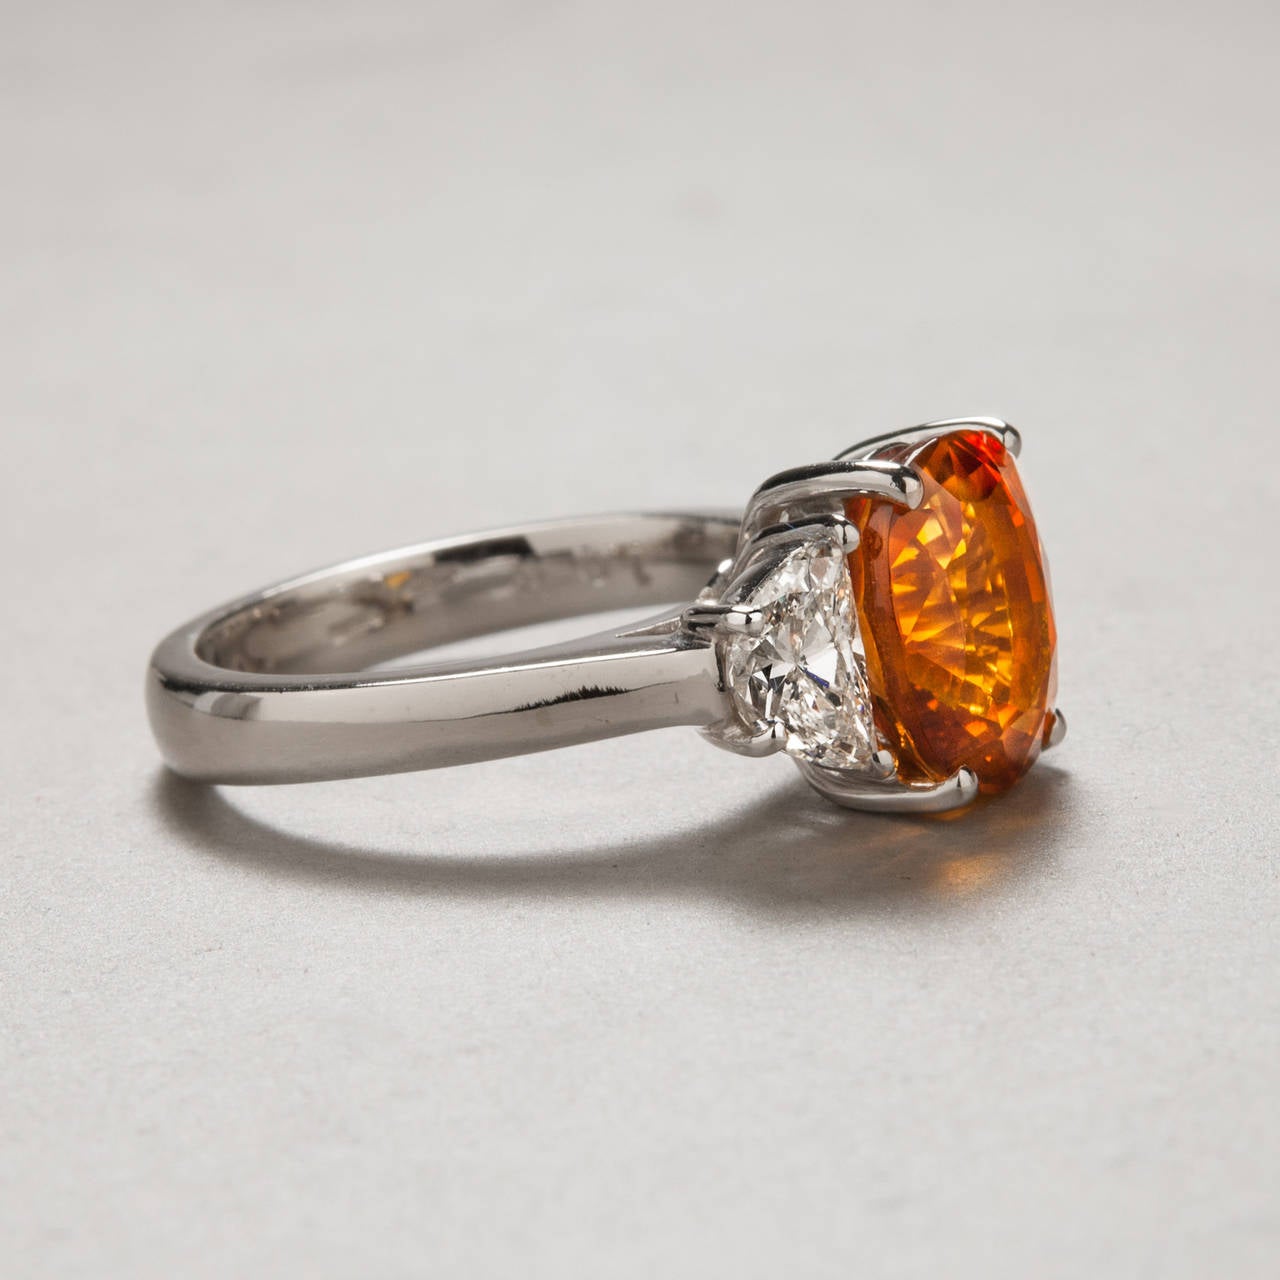 An extraordinarily vibrant orange sapphire sparkles at the center of this 18k white gold ring. The 4.97 carat orange sapphire is accented by two diamonds weighing 1.03 carats total. This Italian made piece has a unique and elegant look.